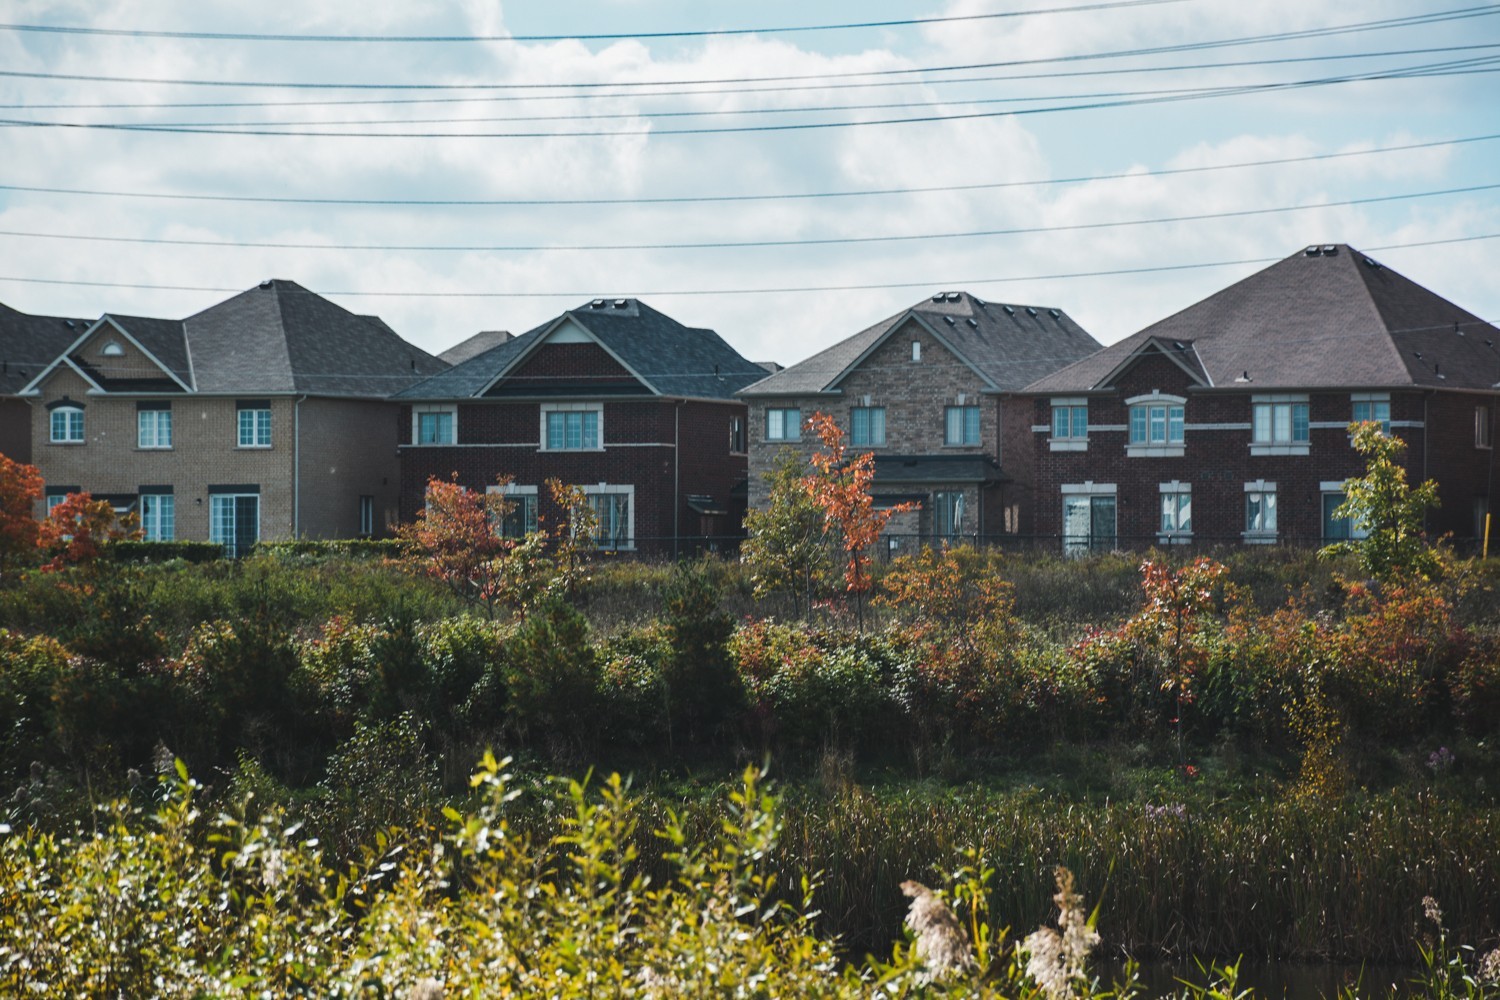 New housing plan requires Brampton to kick its addiction to single family homes